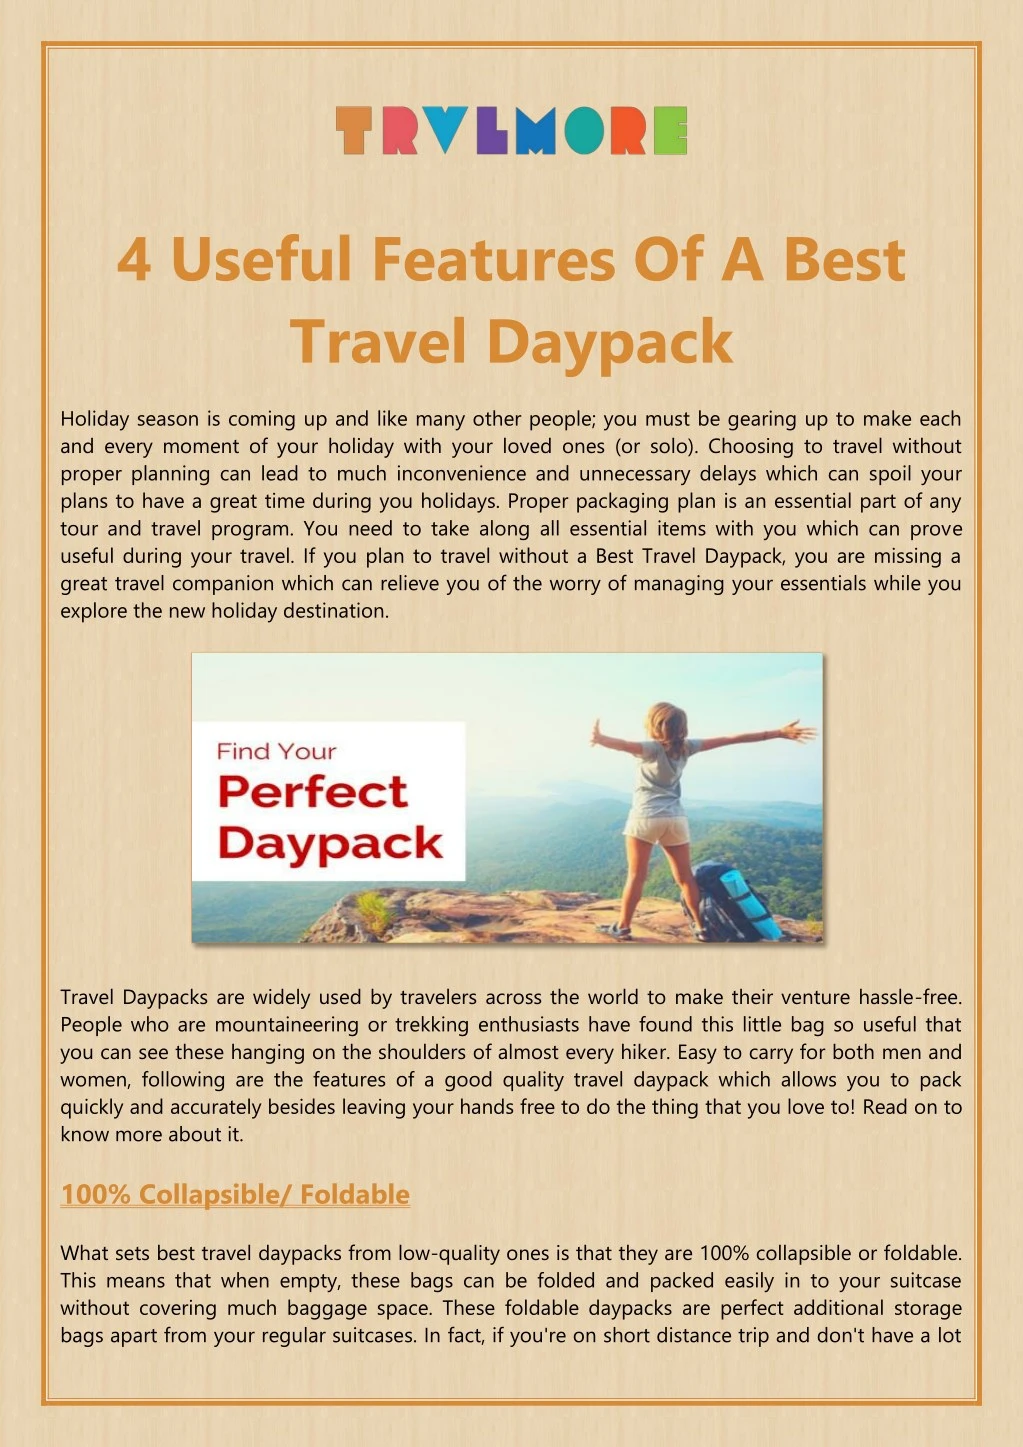 4 useful features of a best travel daypack